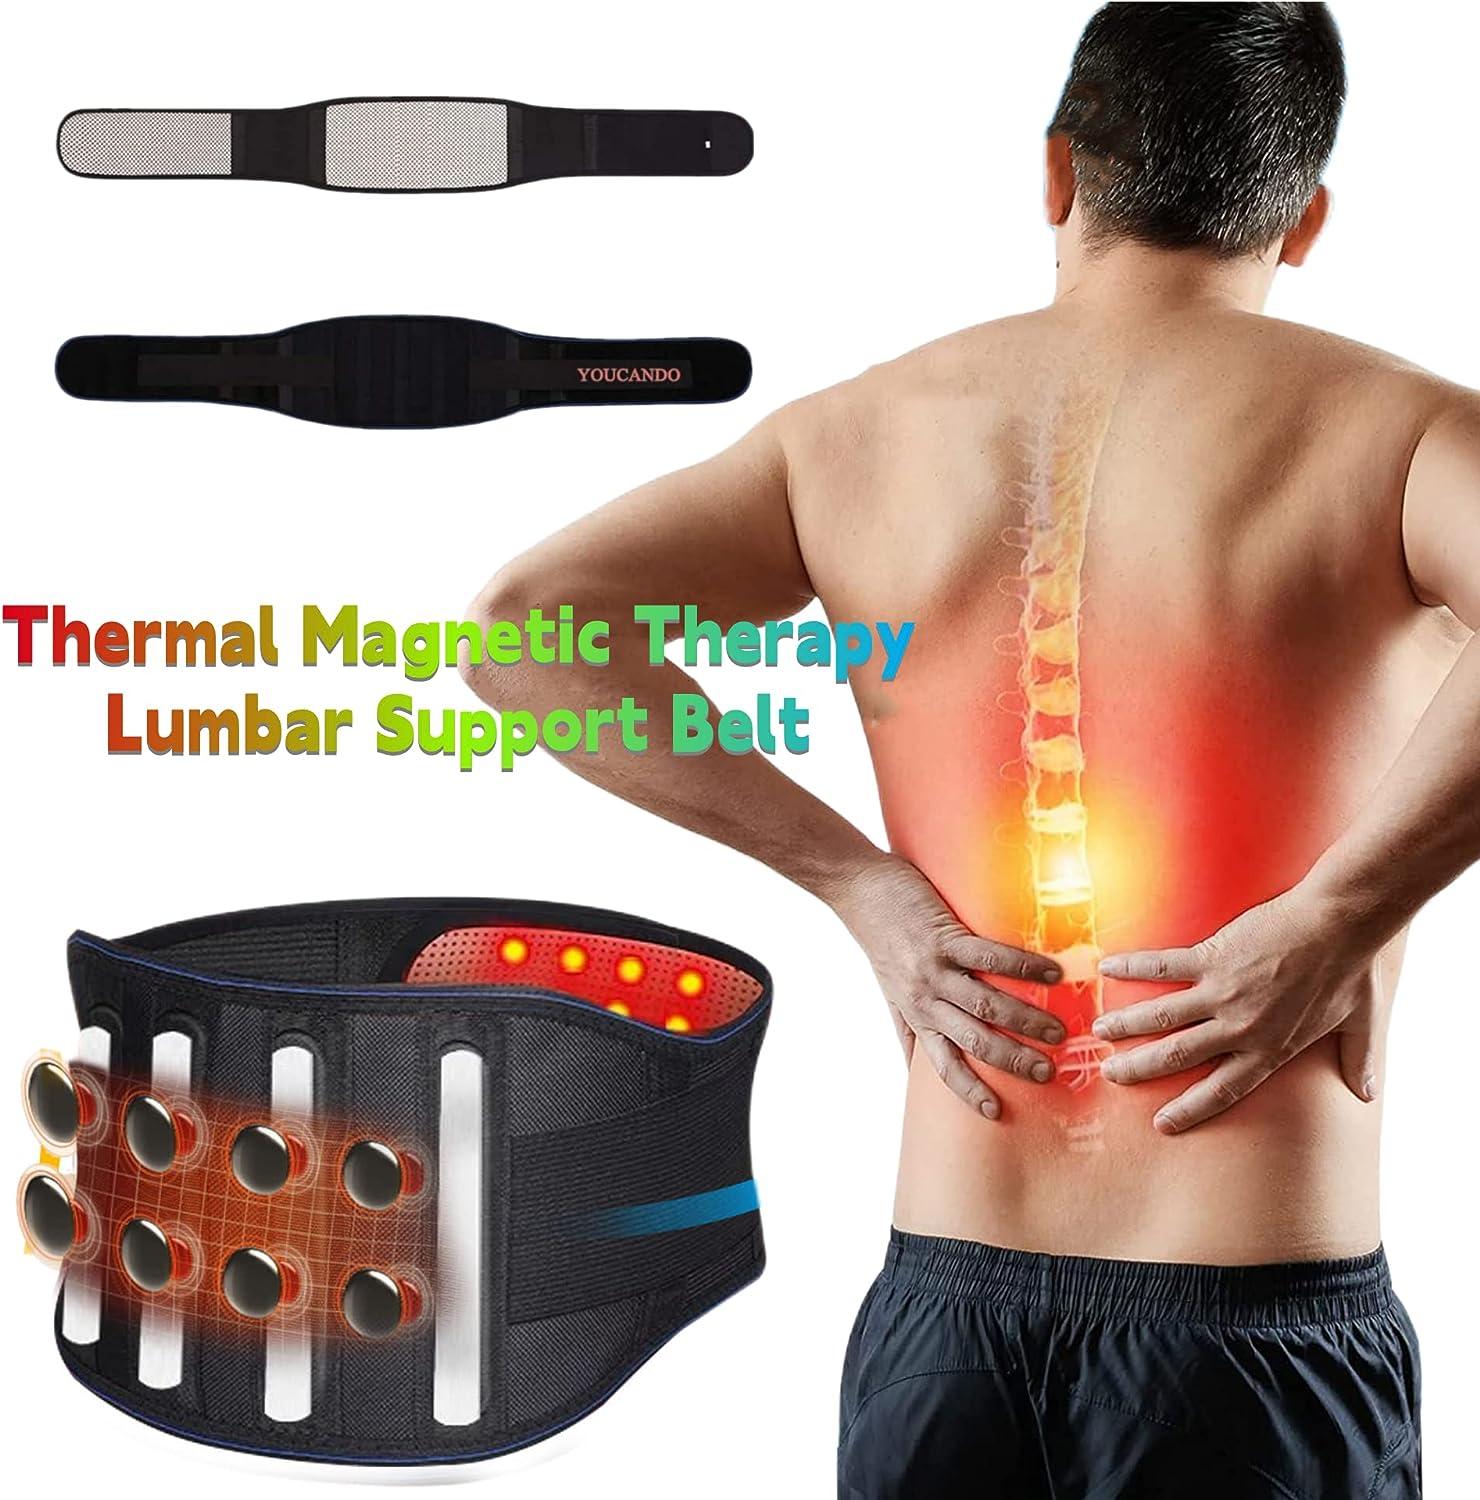 XXL Unisex Magnetic Posture Corrector Back Brace for Back Pain Relief